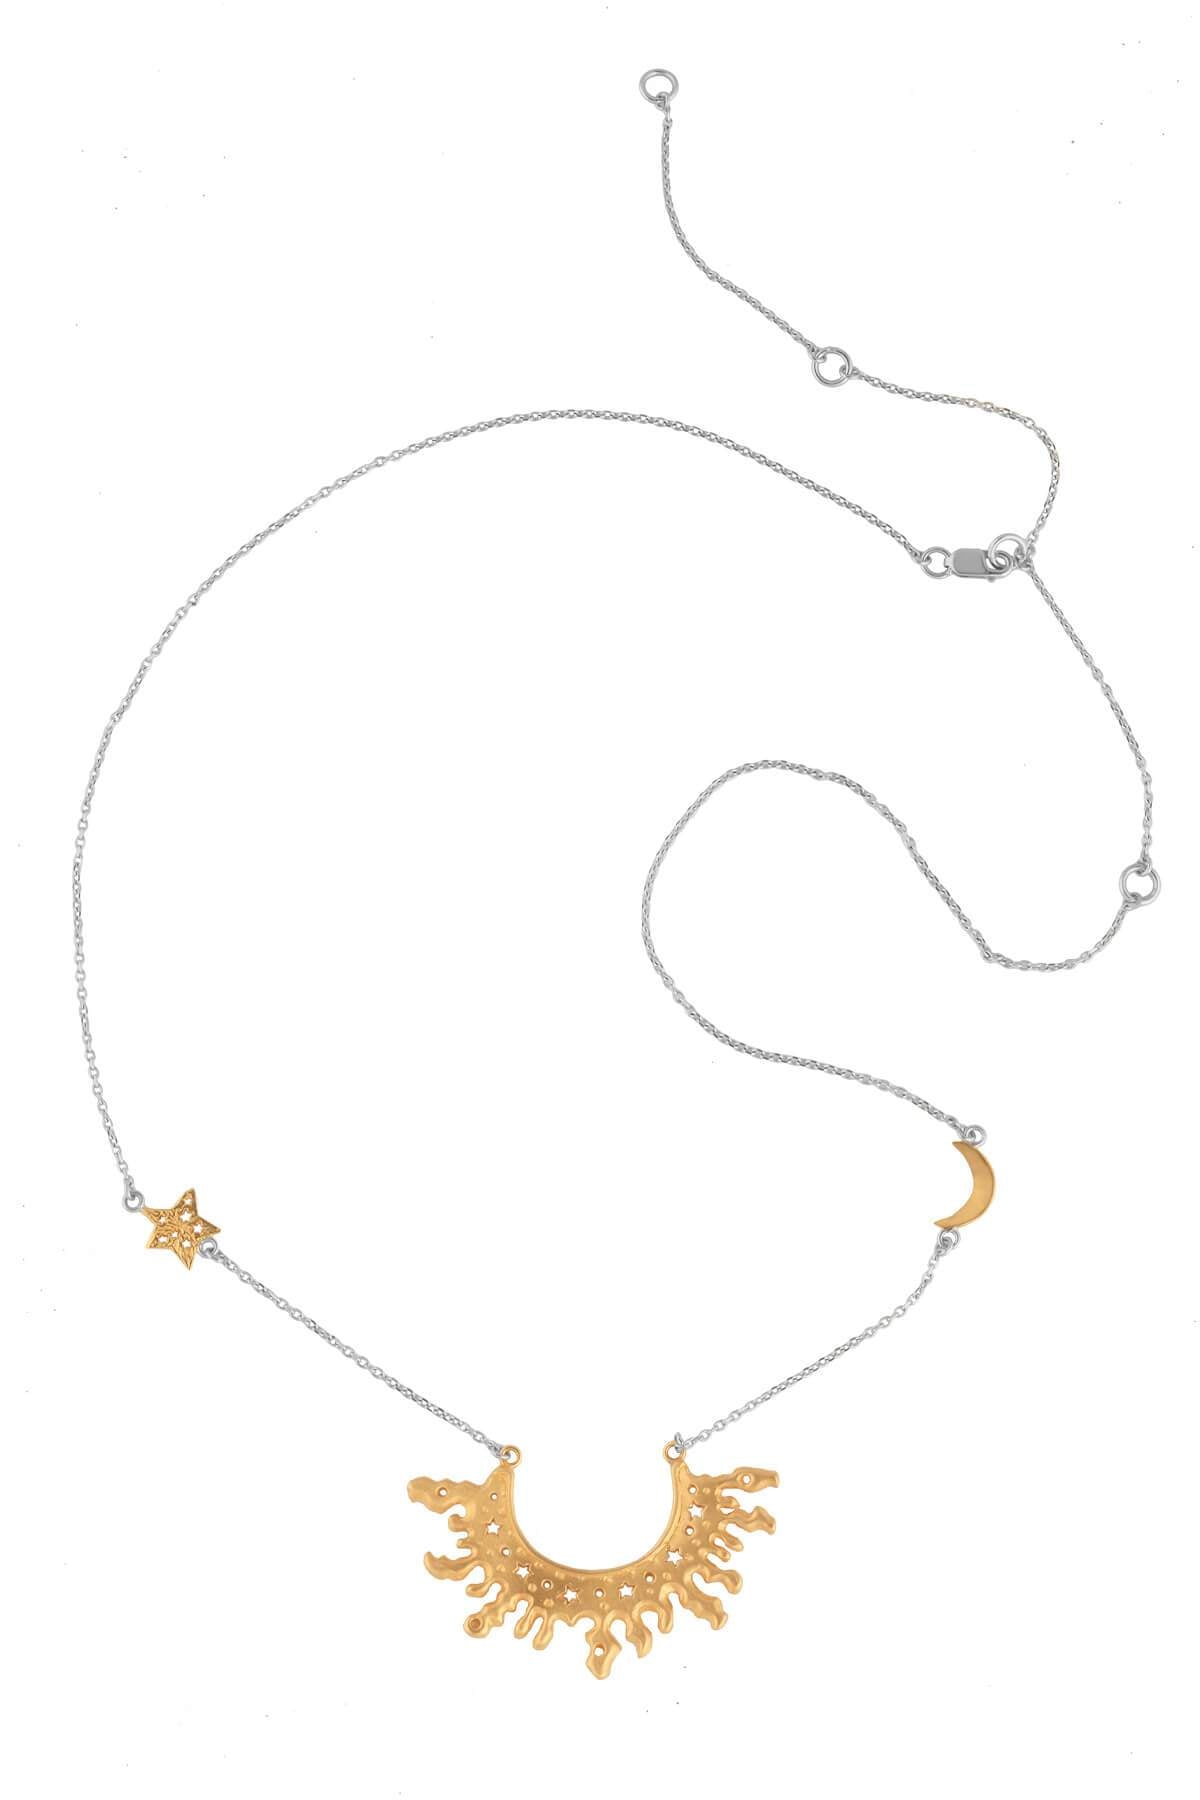 Half Sun with Star and Moon on the chain necklace. Silver, partly gold-plated